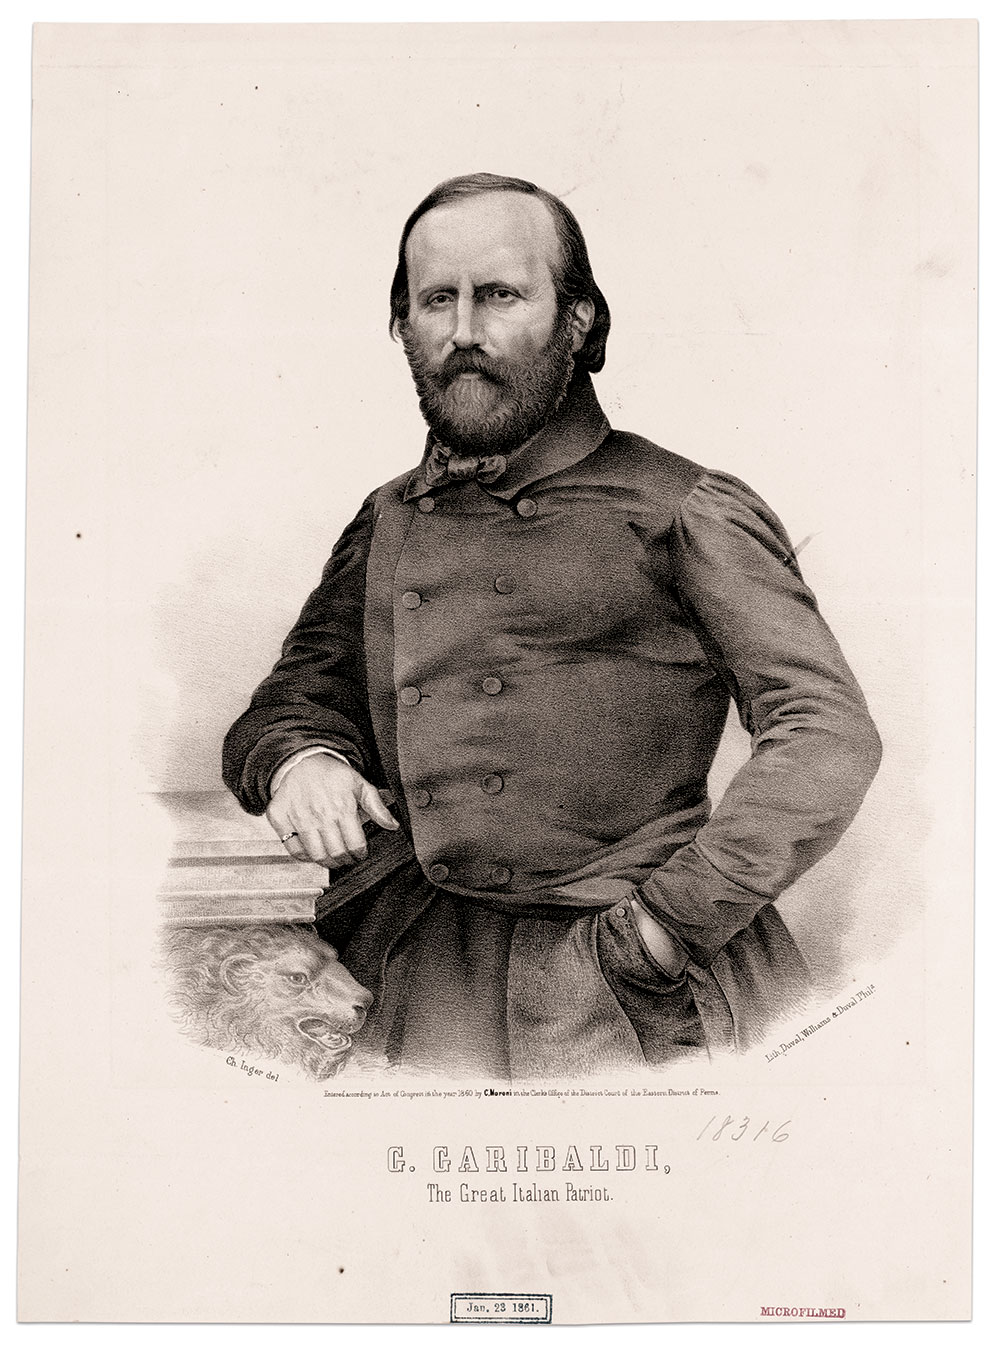 “The Great Italian Patriot” in 1860. Library of Congress.